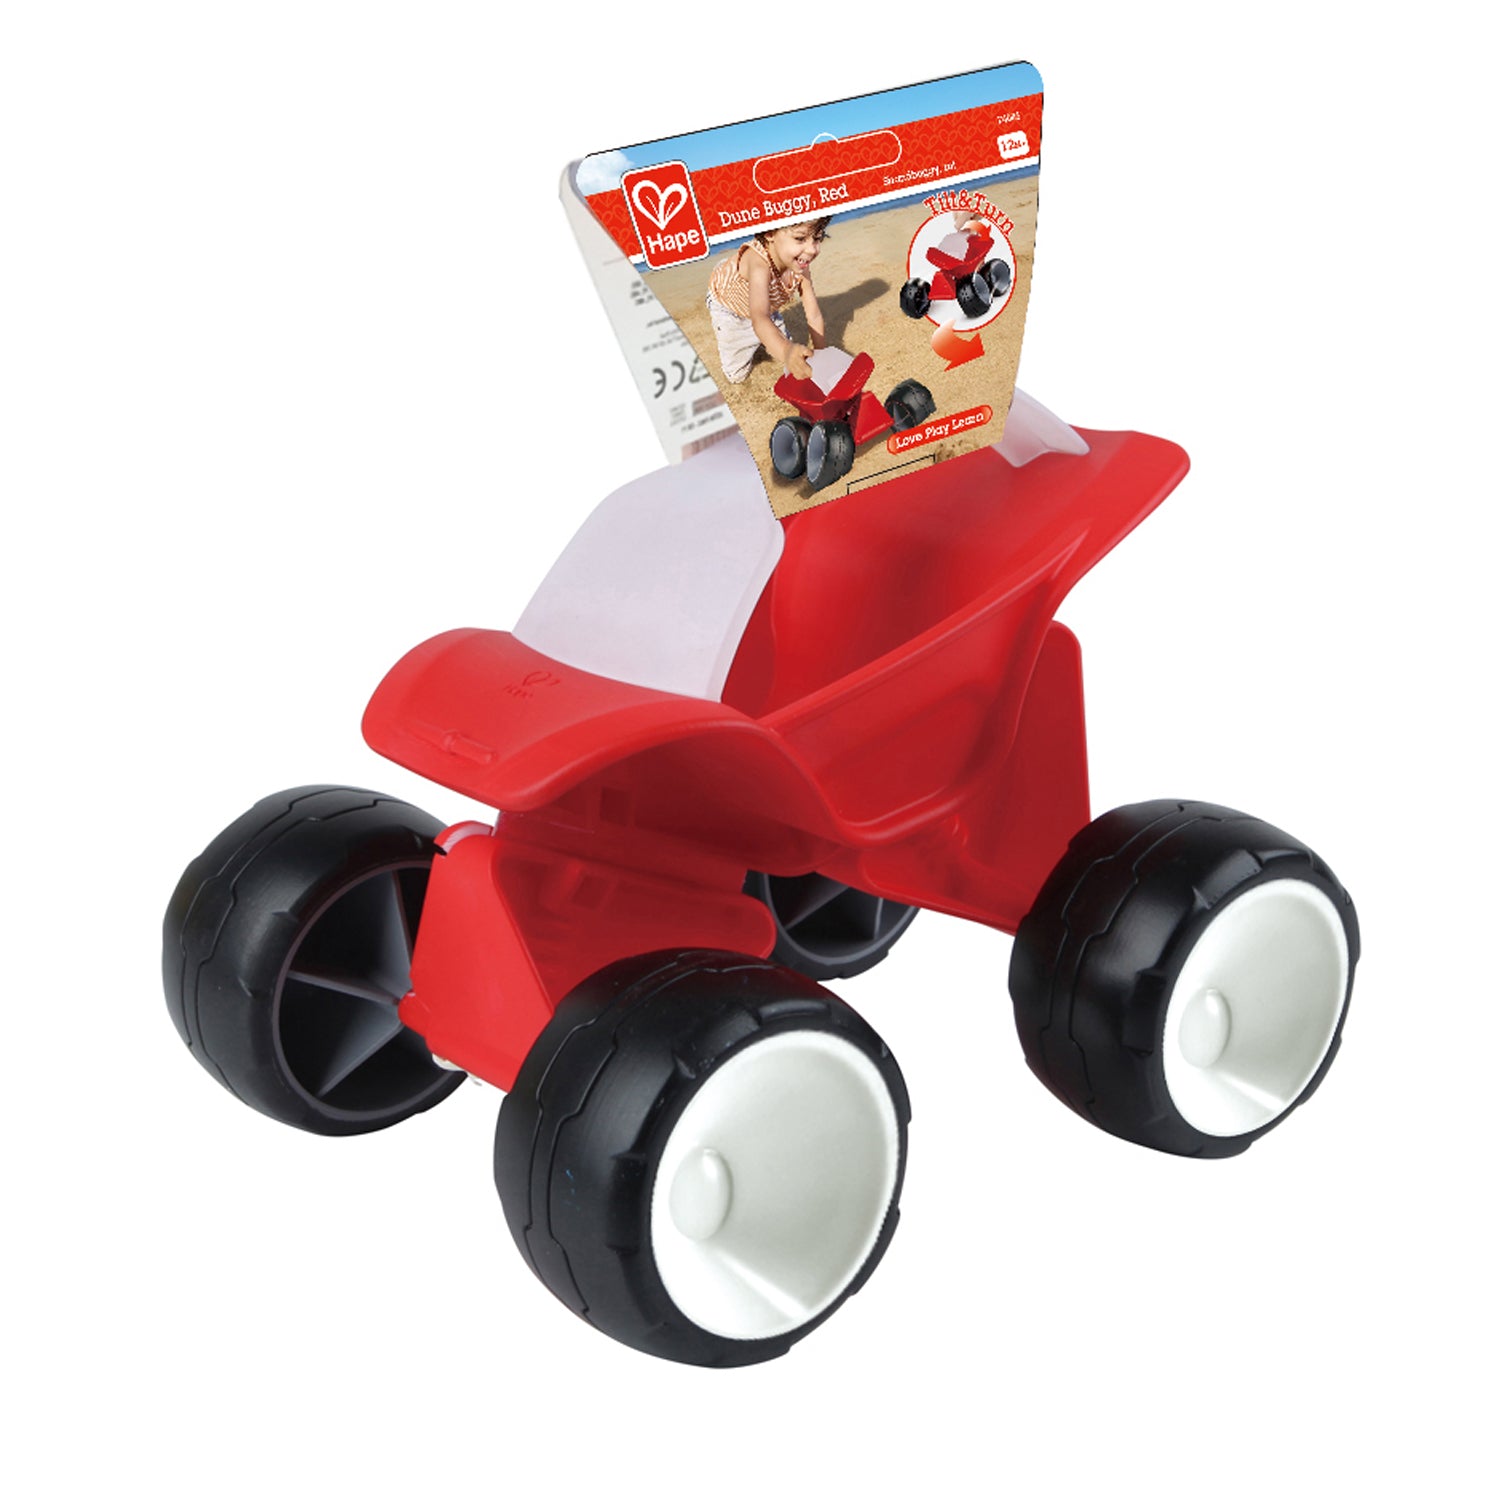 Hape Dune Buggy - Red perfect for the sand or backyard play with quality outdoor toys The Toy Wagon